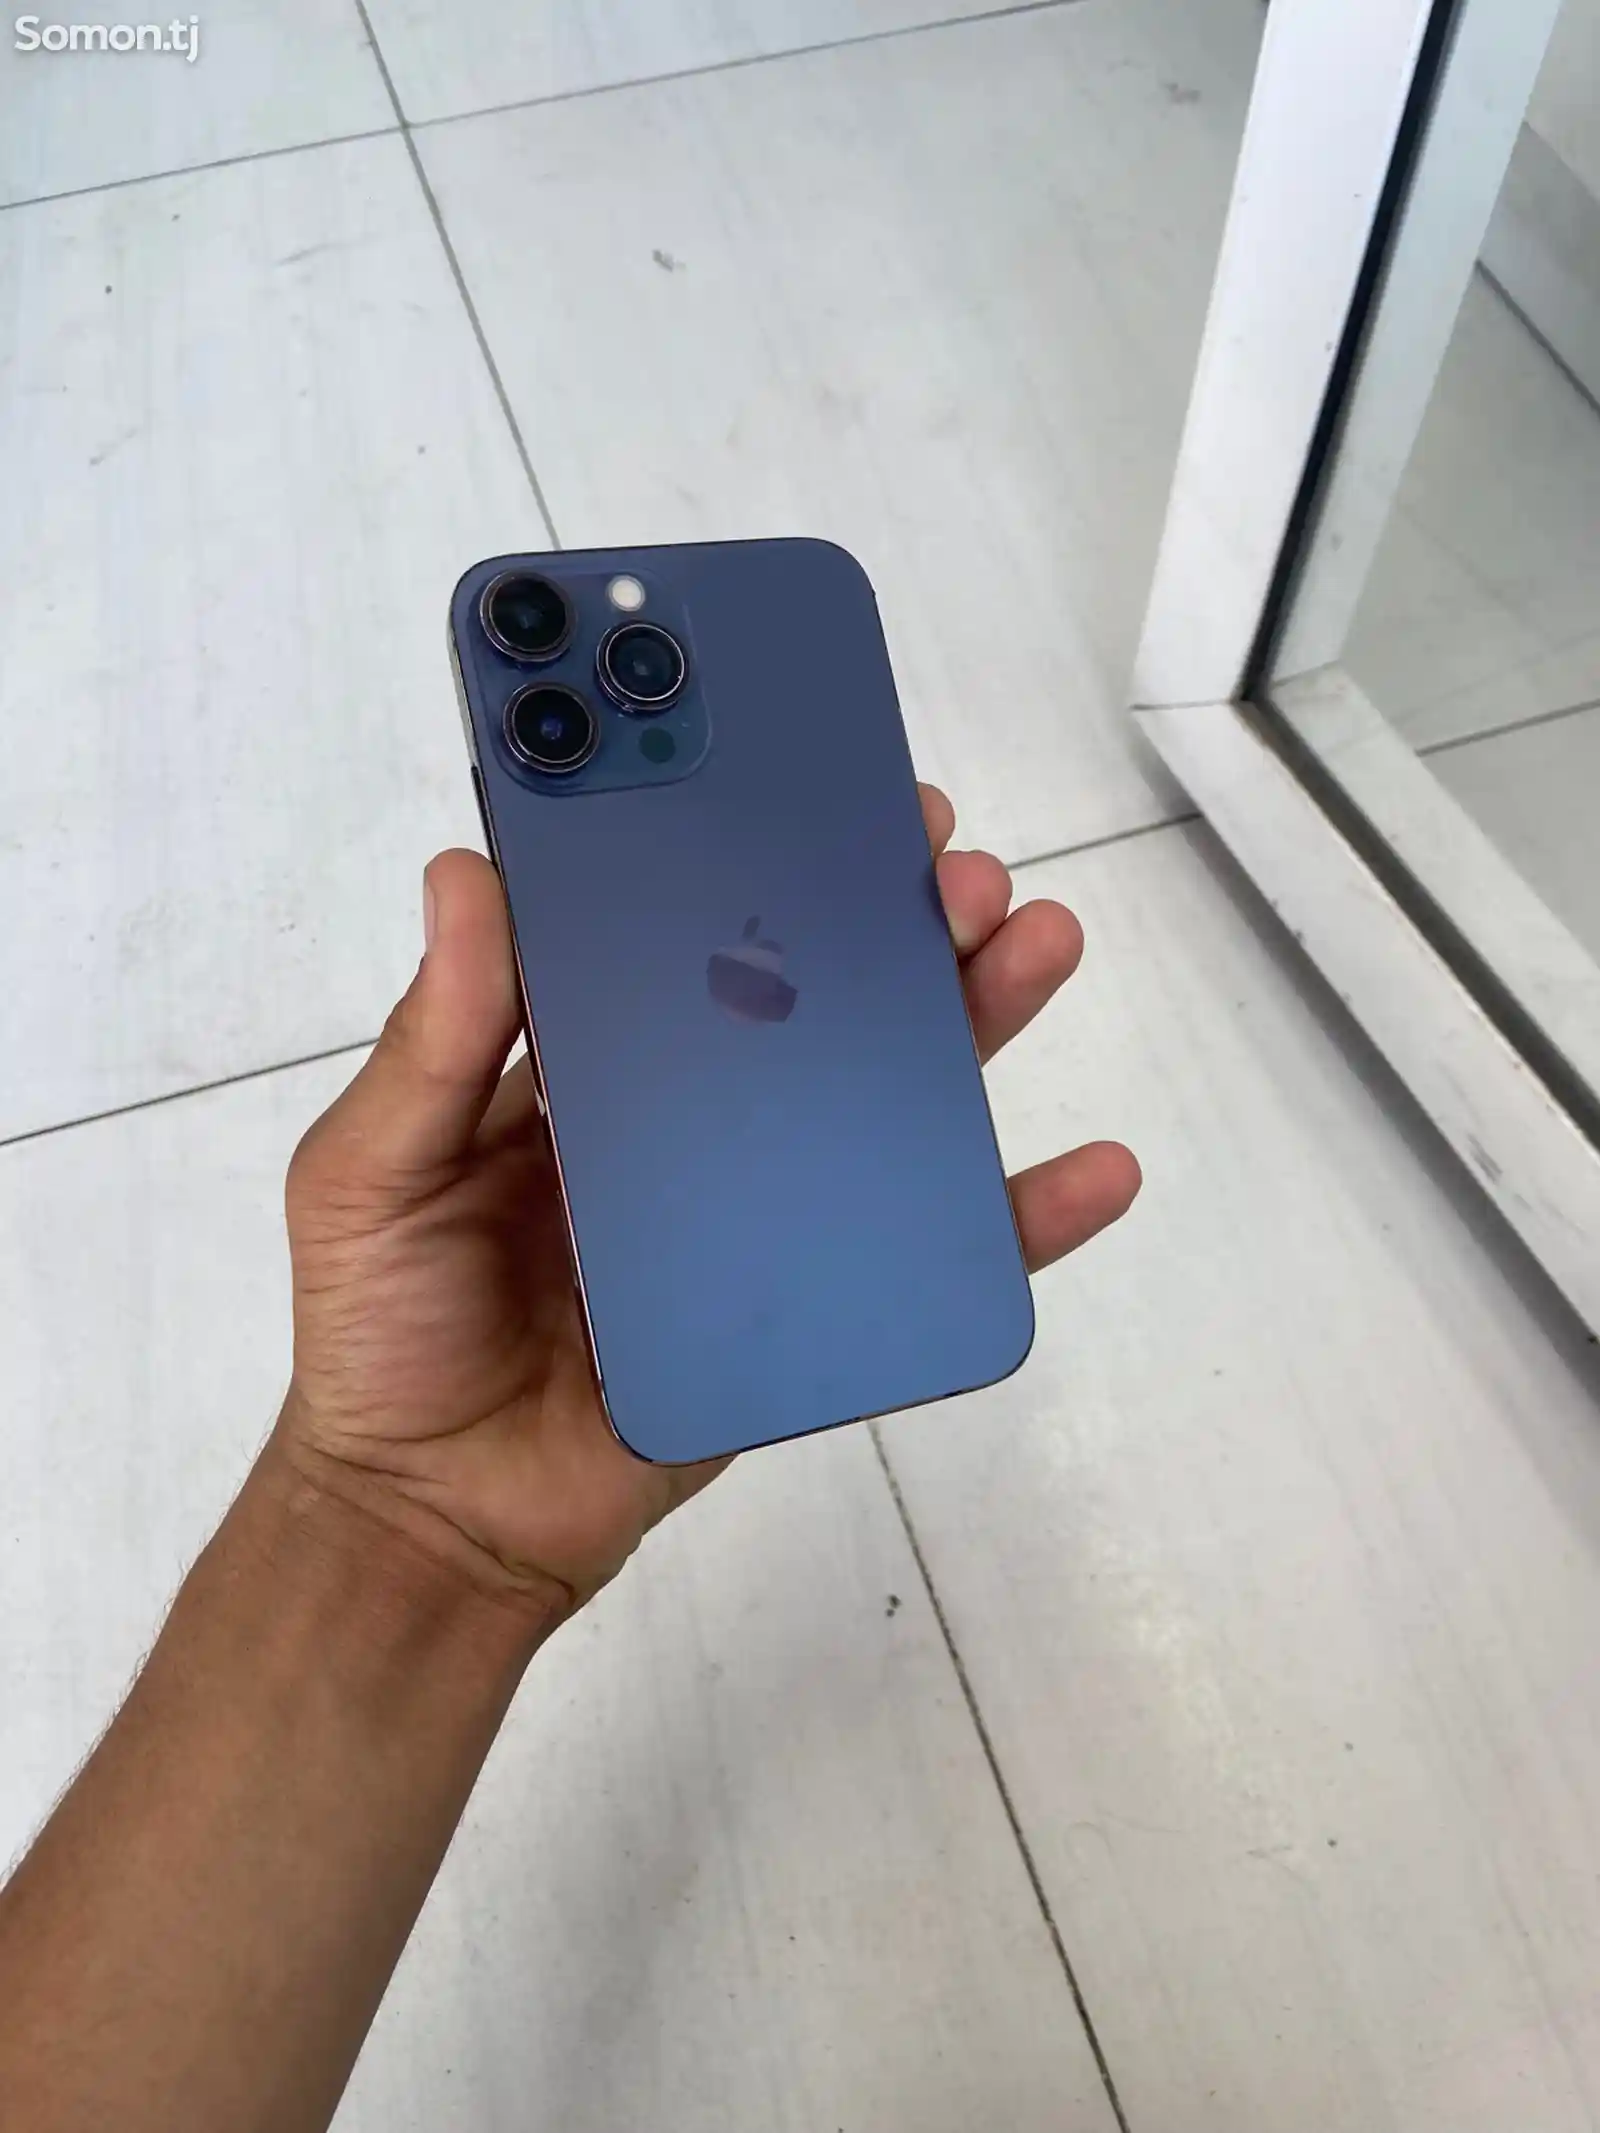 Apple iPhone Xr, 128 gb, Coral-1